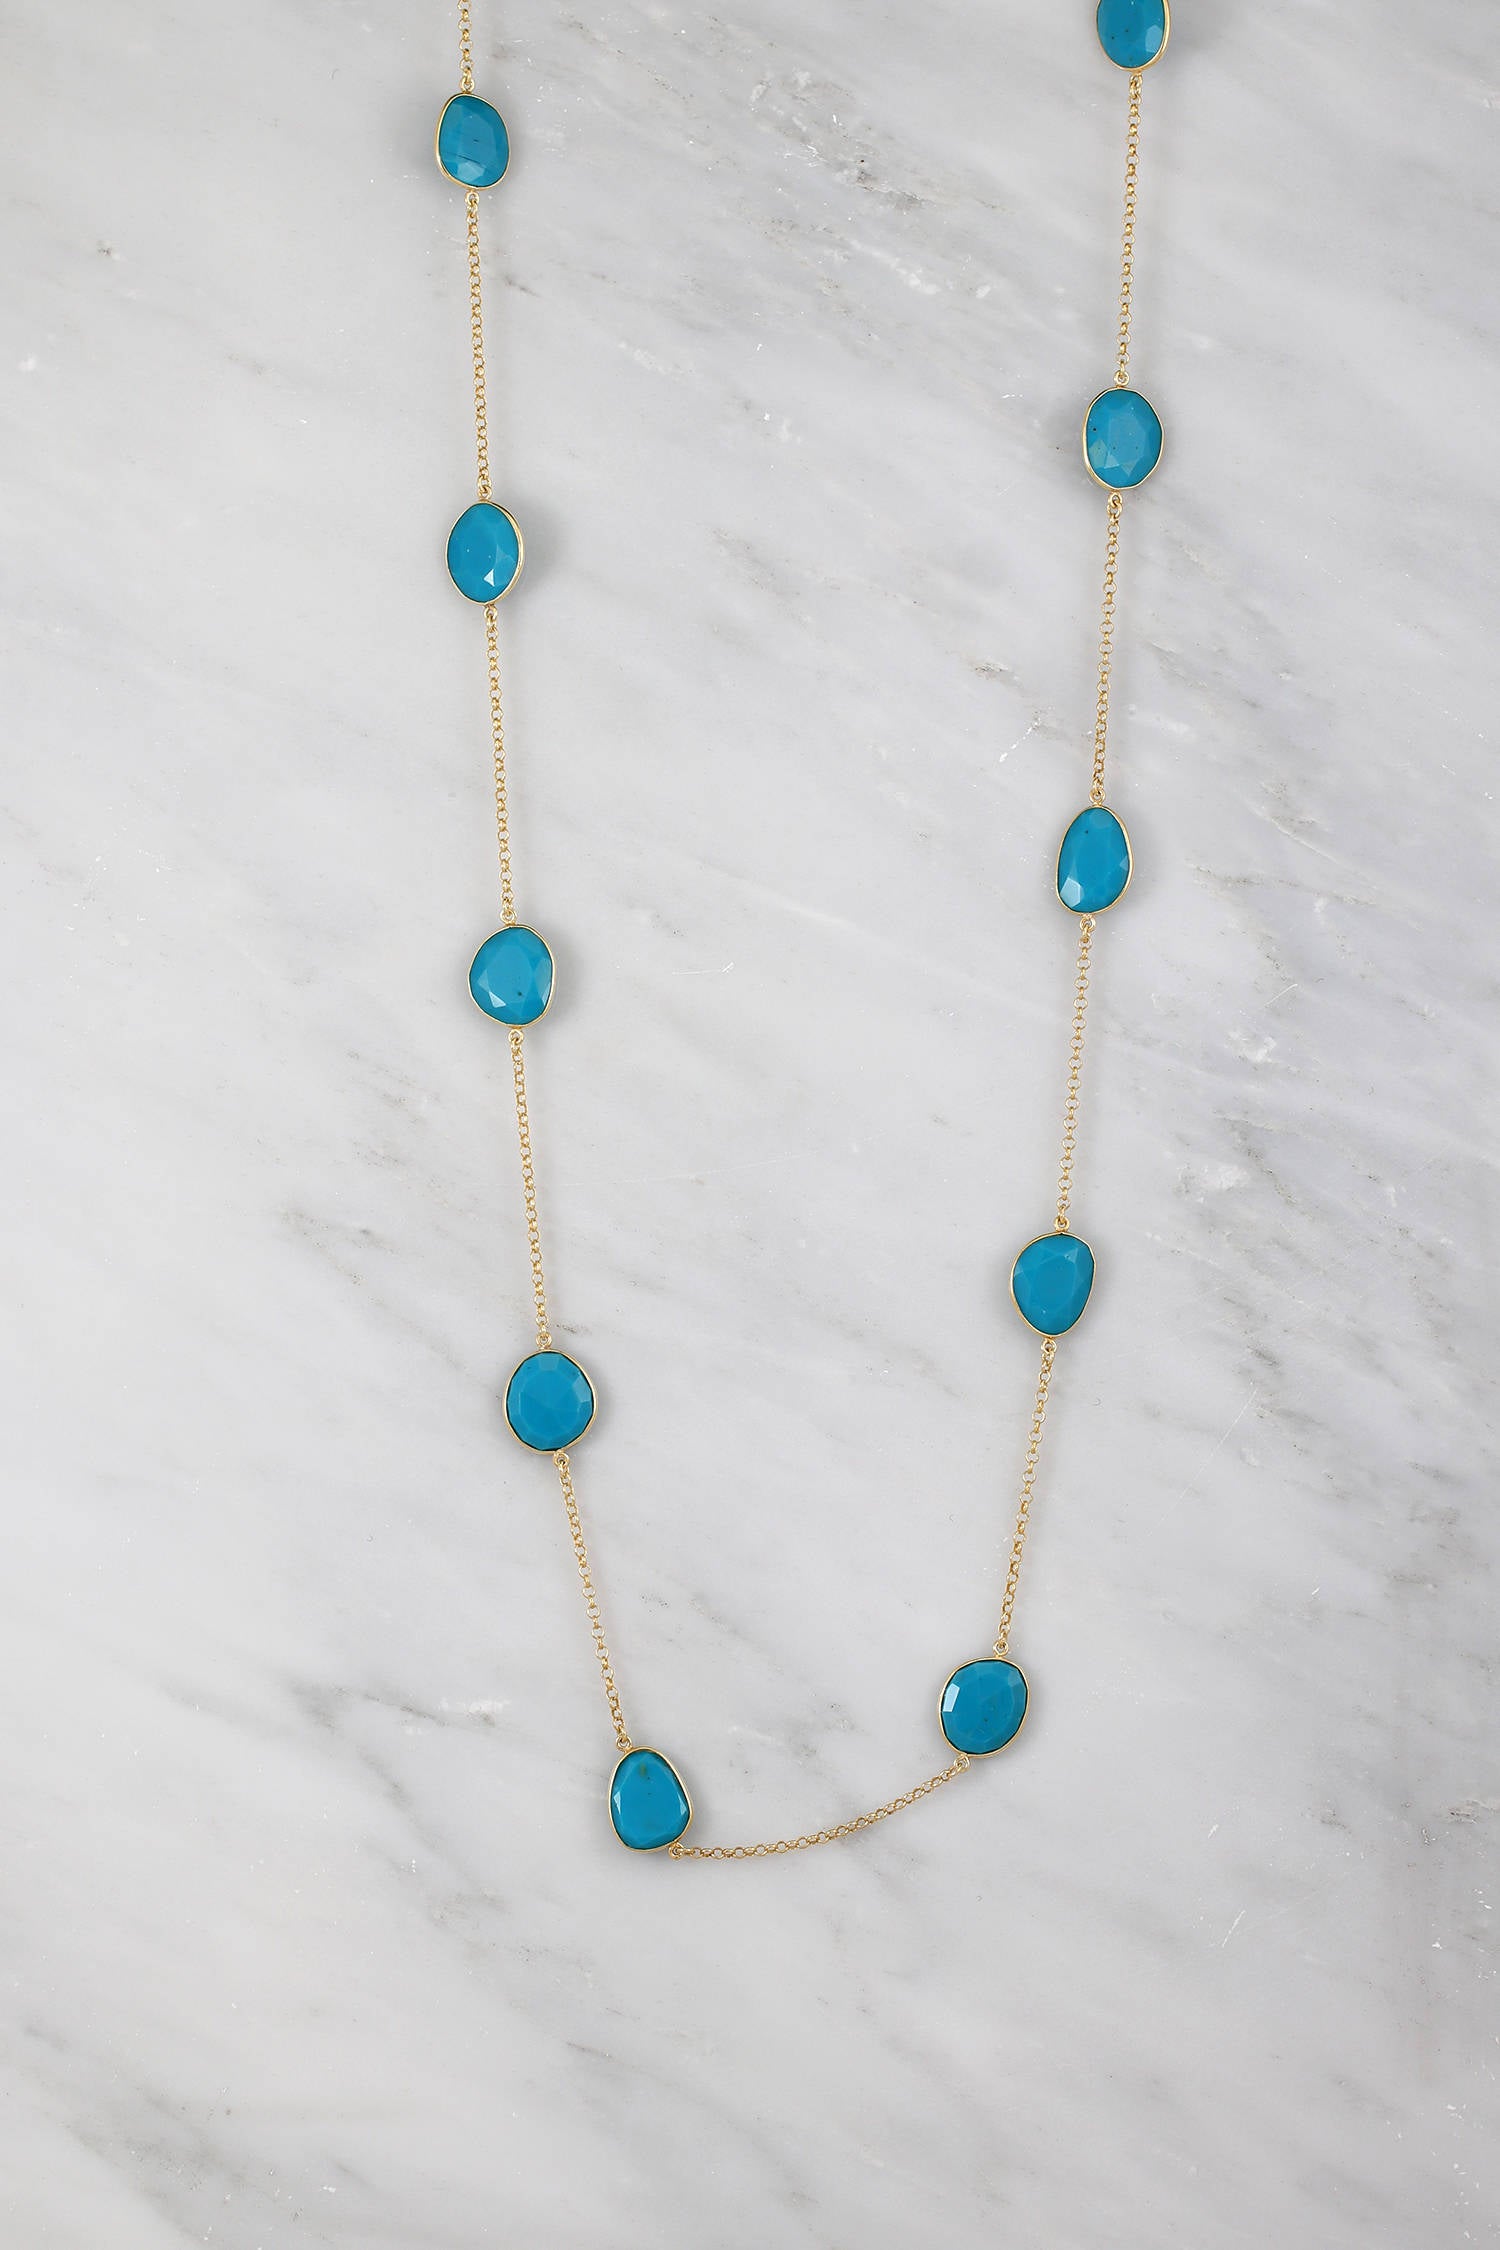 Artisan Silver by Samuel B. Sleeping Beauty Turquoise Station Necklace -  ShopHQ.com